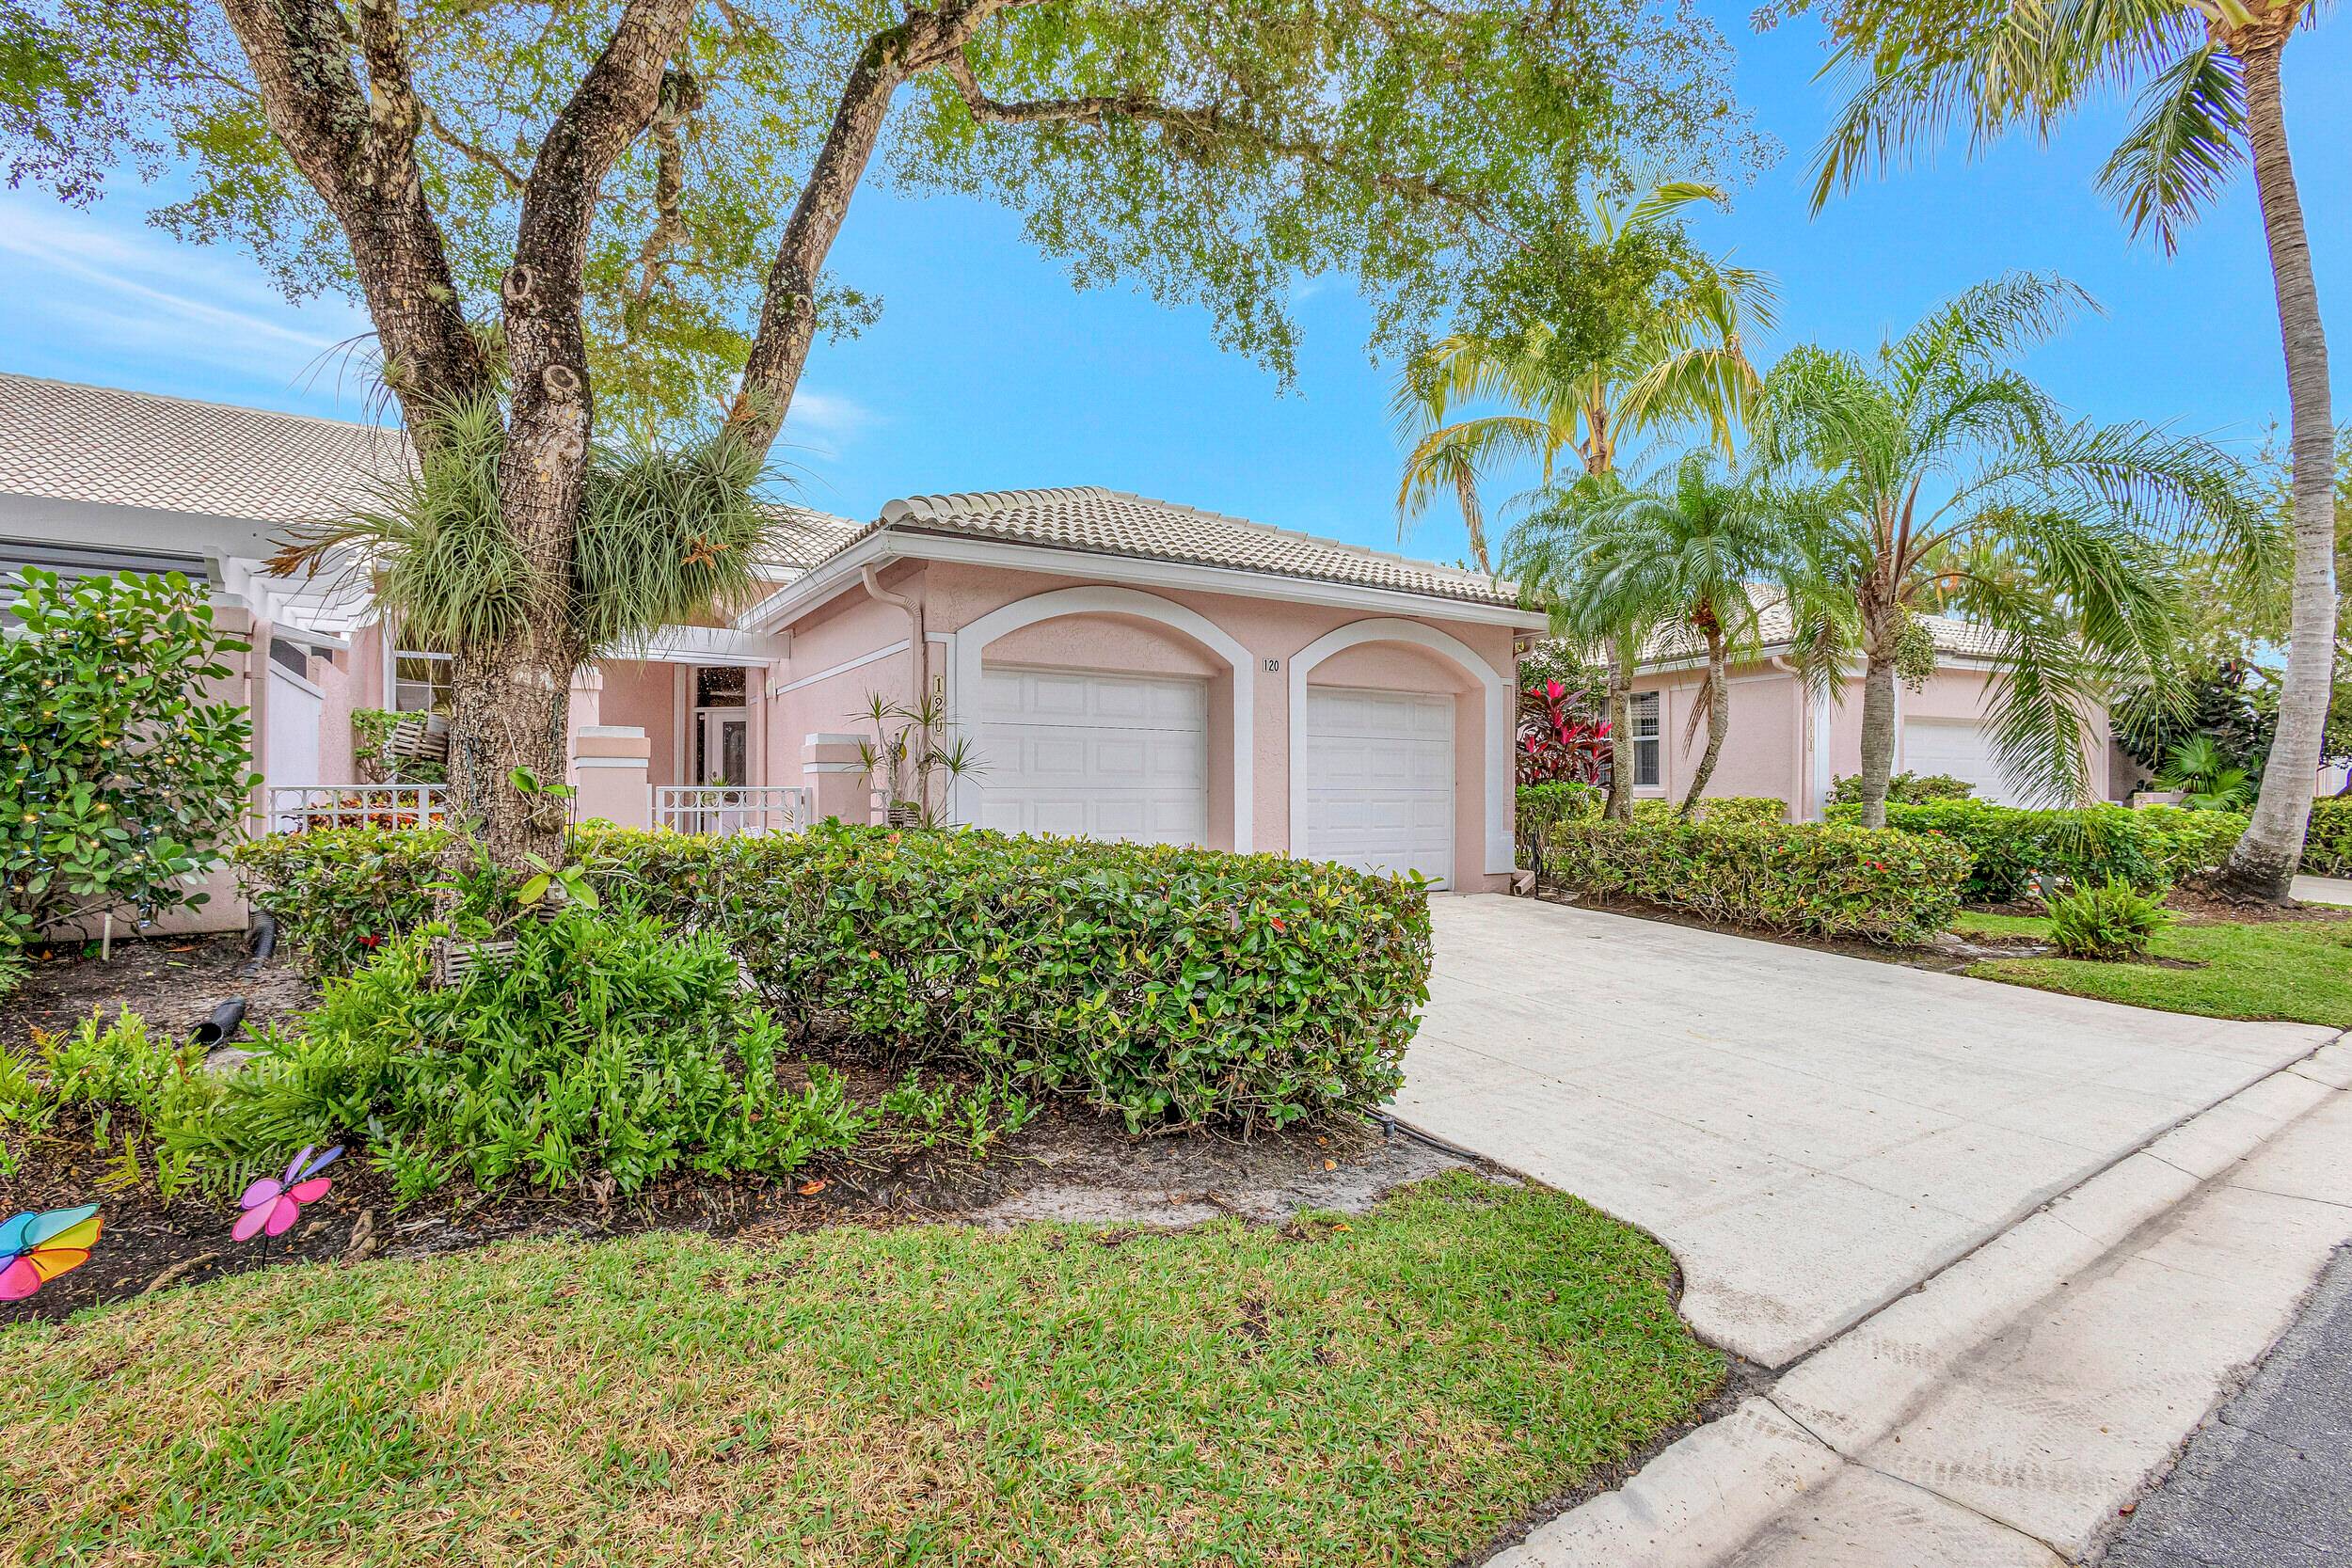 Live the dream in this townhouse nestled on the 9th hole of the legendary Palmer golf course at PGA National, home the Cognizant Classic on the PGA Tour !